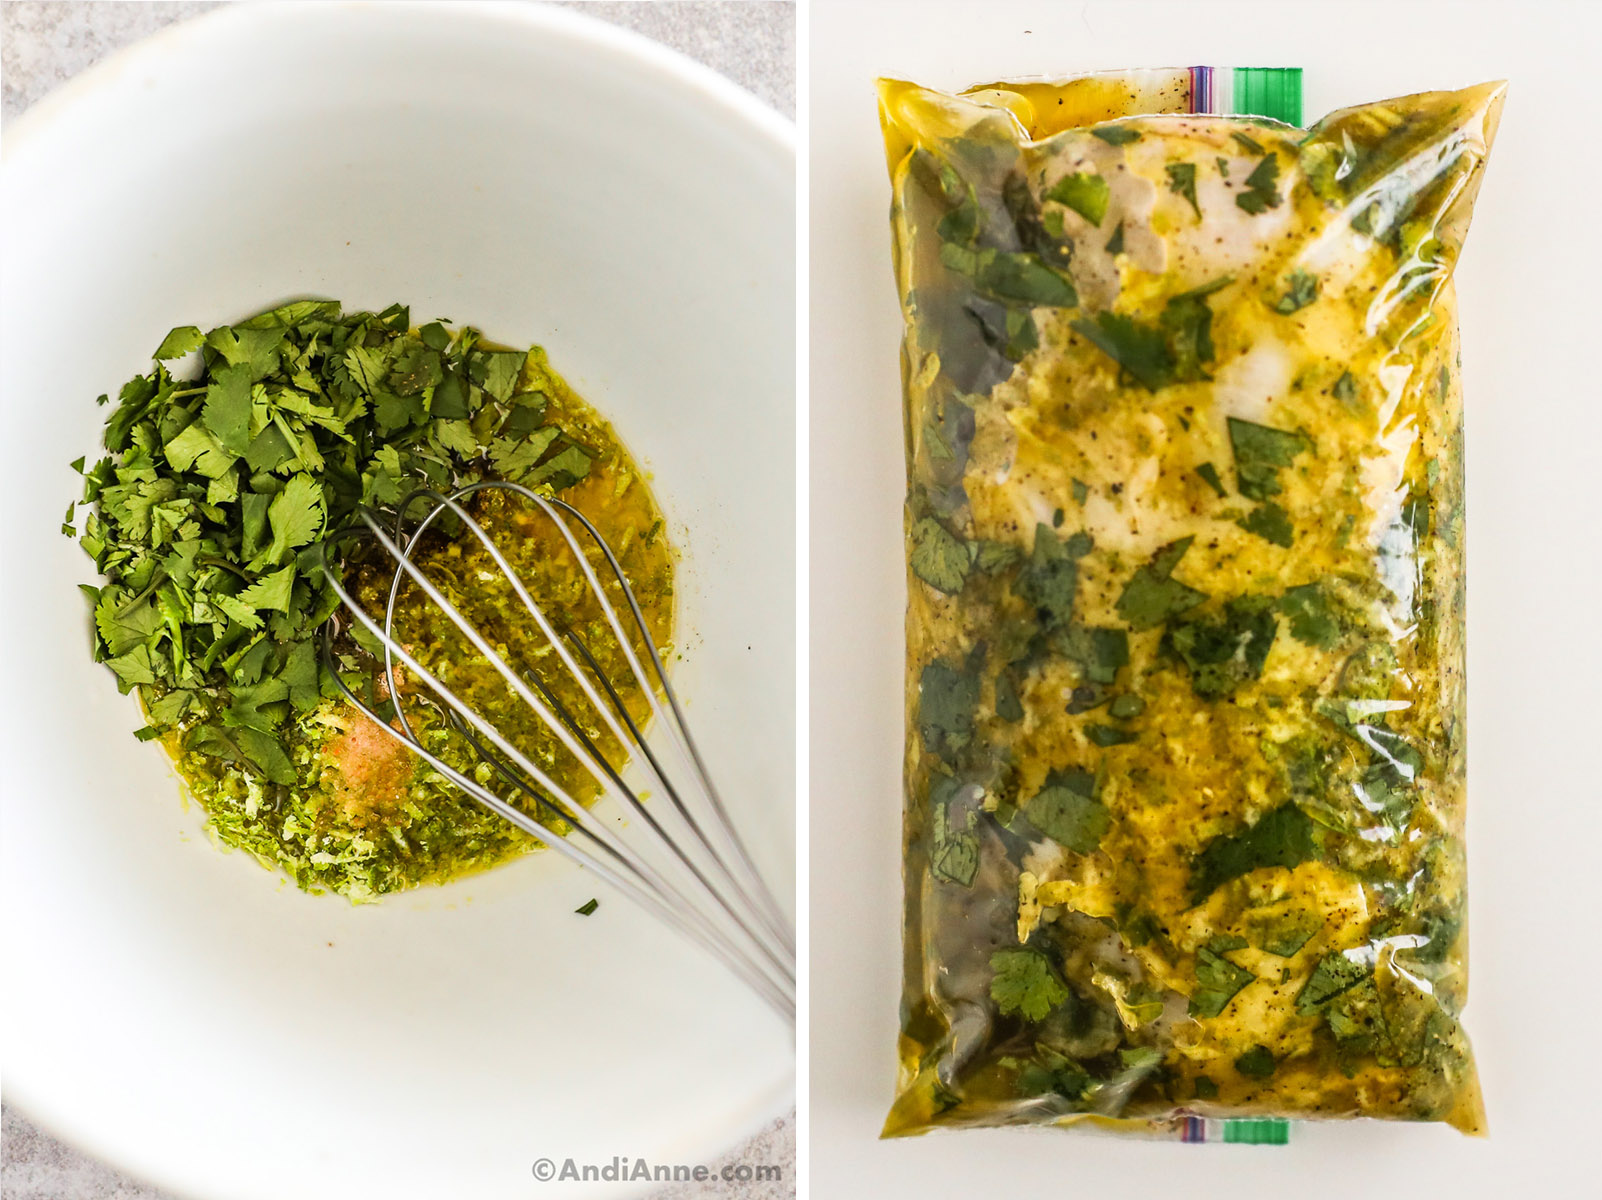 A white bowl with chopped cilantro and various yellow ingredients and a whisk. Second image is a bag with raw chicken breast covered in the yellow marinade sauce with chopped cilantro.